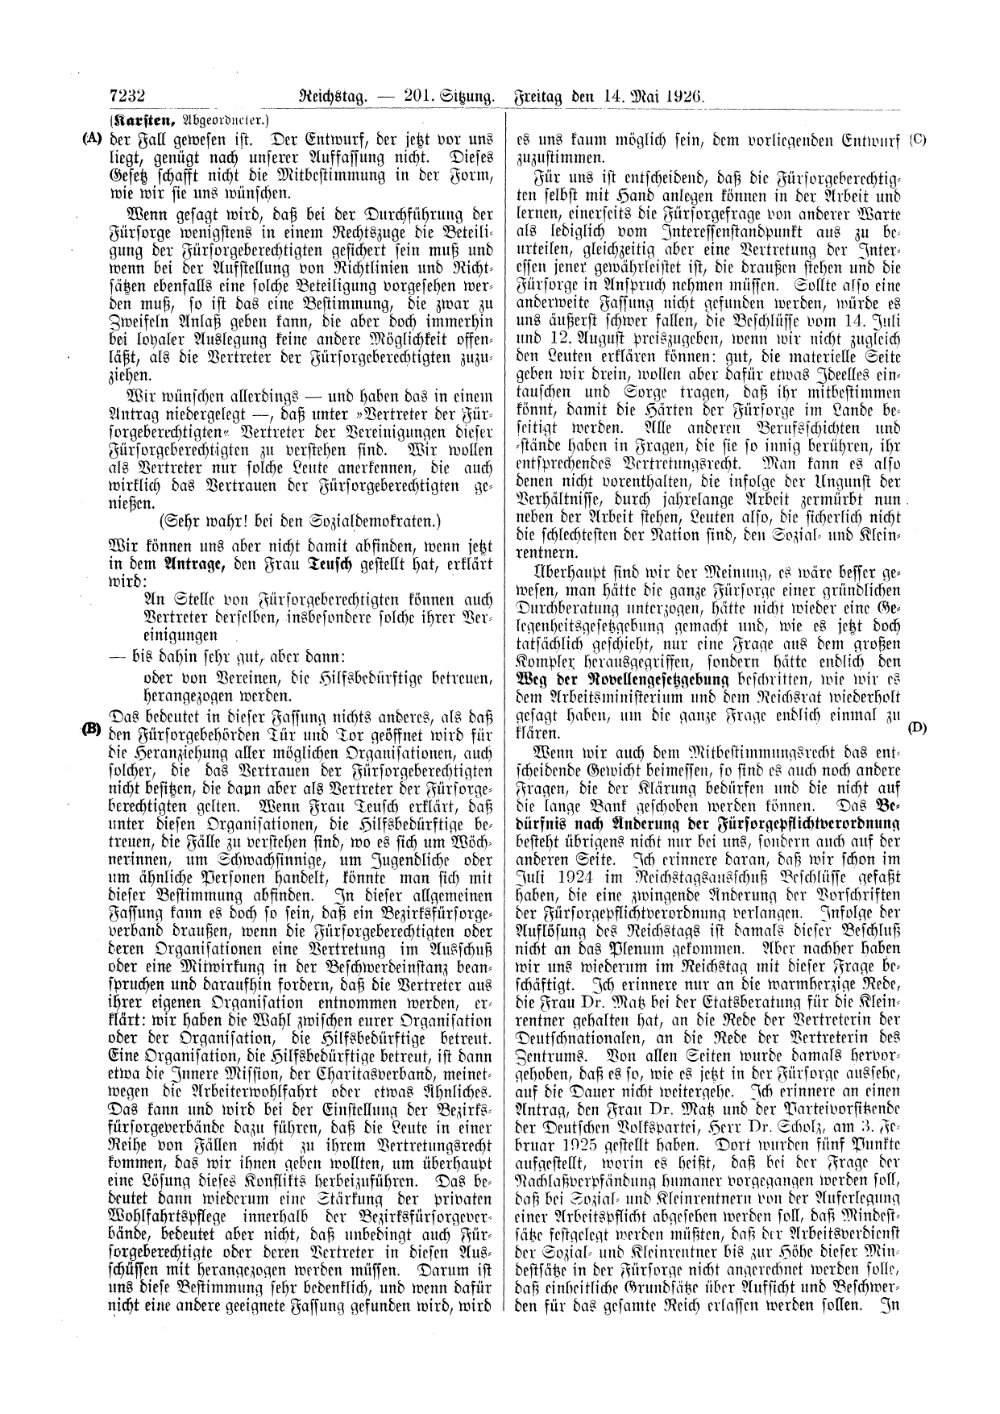 Scan of page 7232